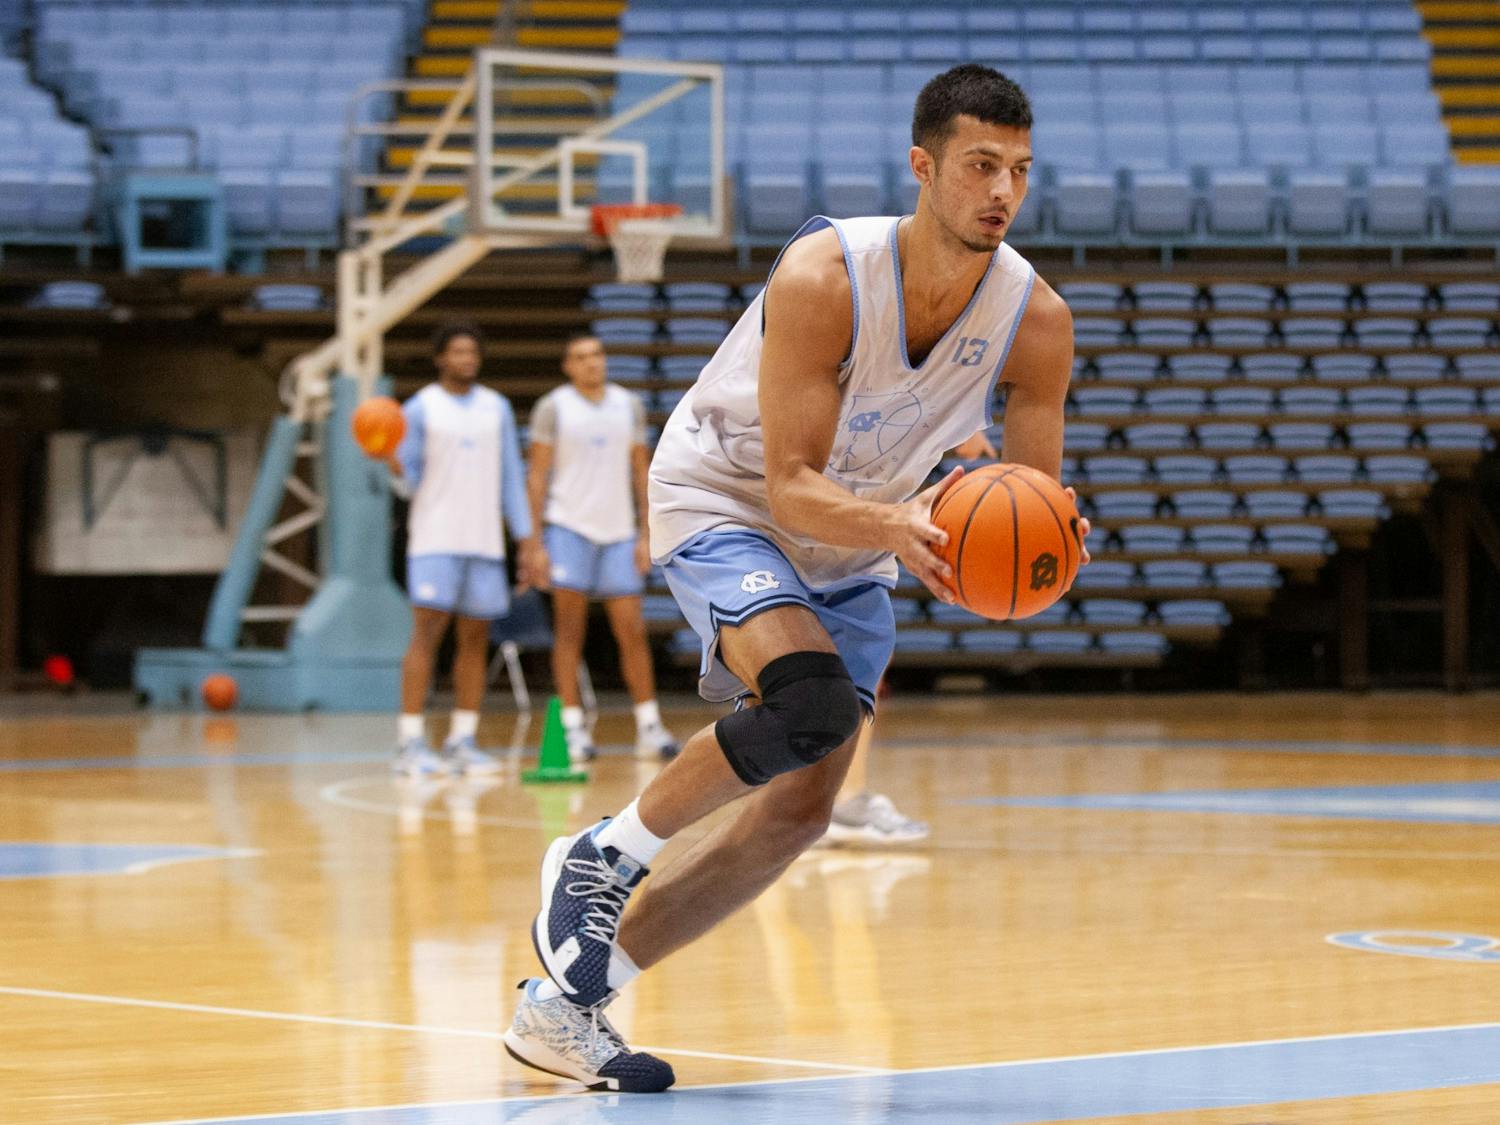 Sophomore forward Dawson Garcia (13) runs with the ball at the UNC men's basketball practice on Sept. 29 at the Dean Dome.